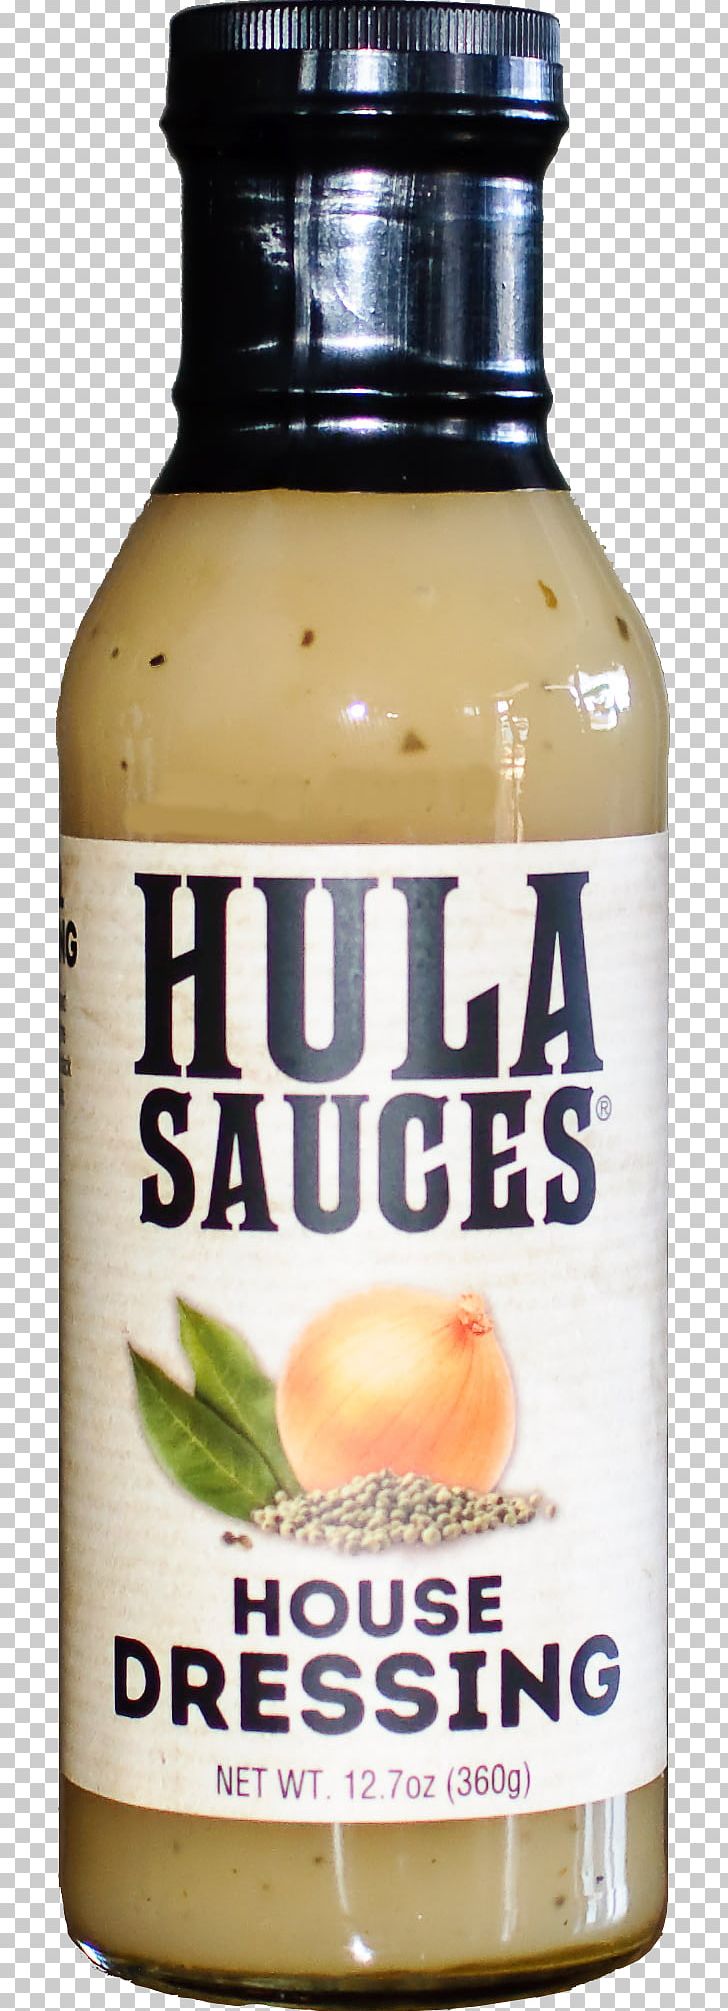 Hula Restaurant And Sauce Co. Cuisine Of Hawaii Boardwalk PNG, Clipart, Boardwalk, City, Condiment, Cuisine Of Hawaii, Flavor Free PNG Download